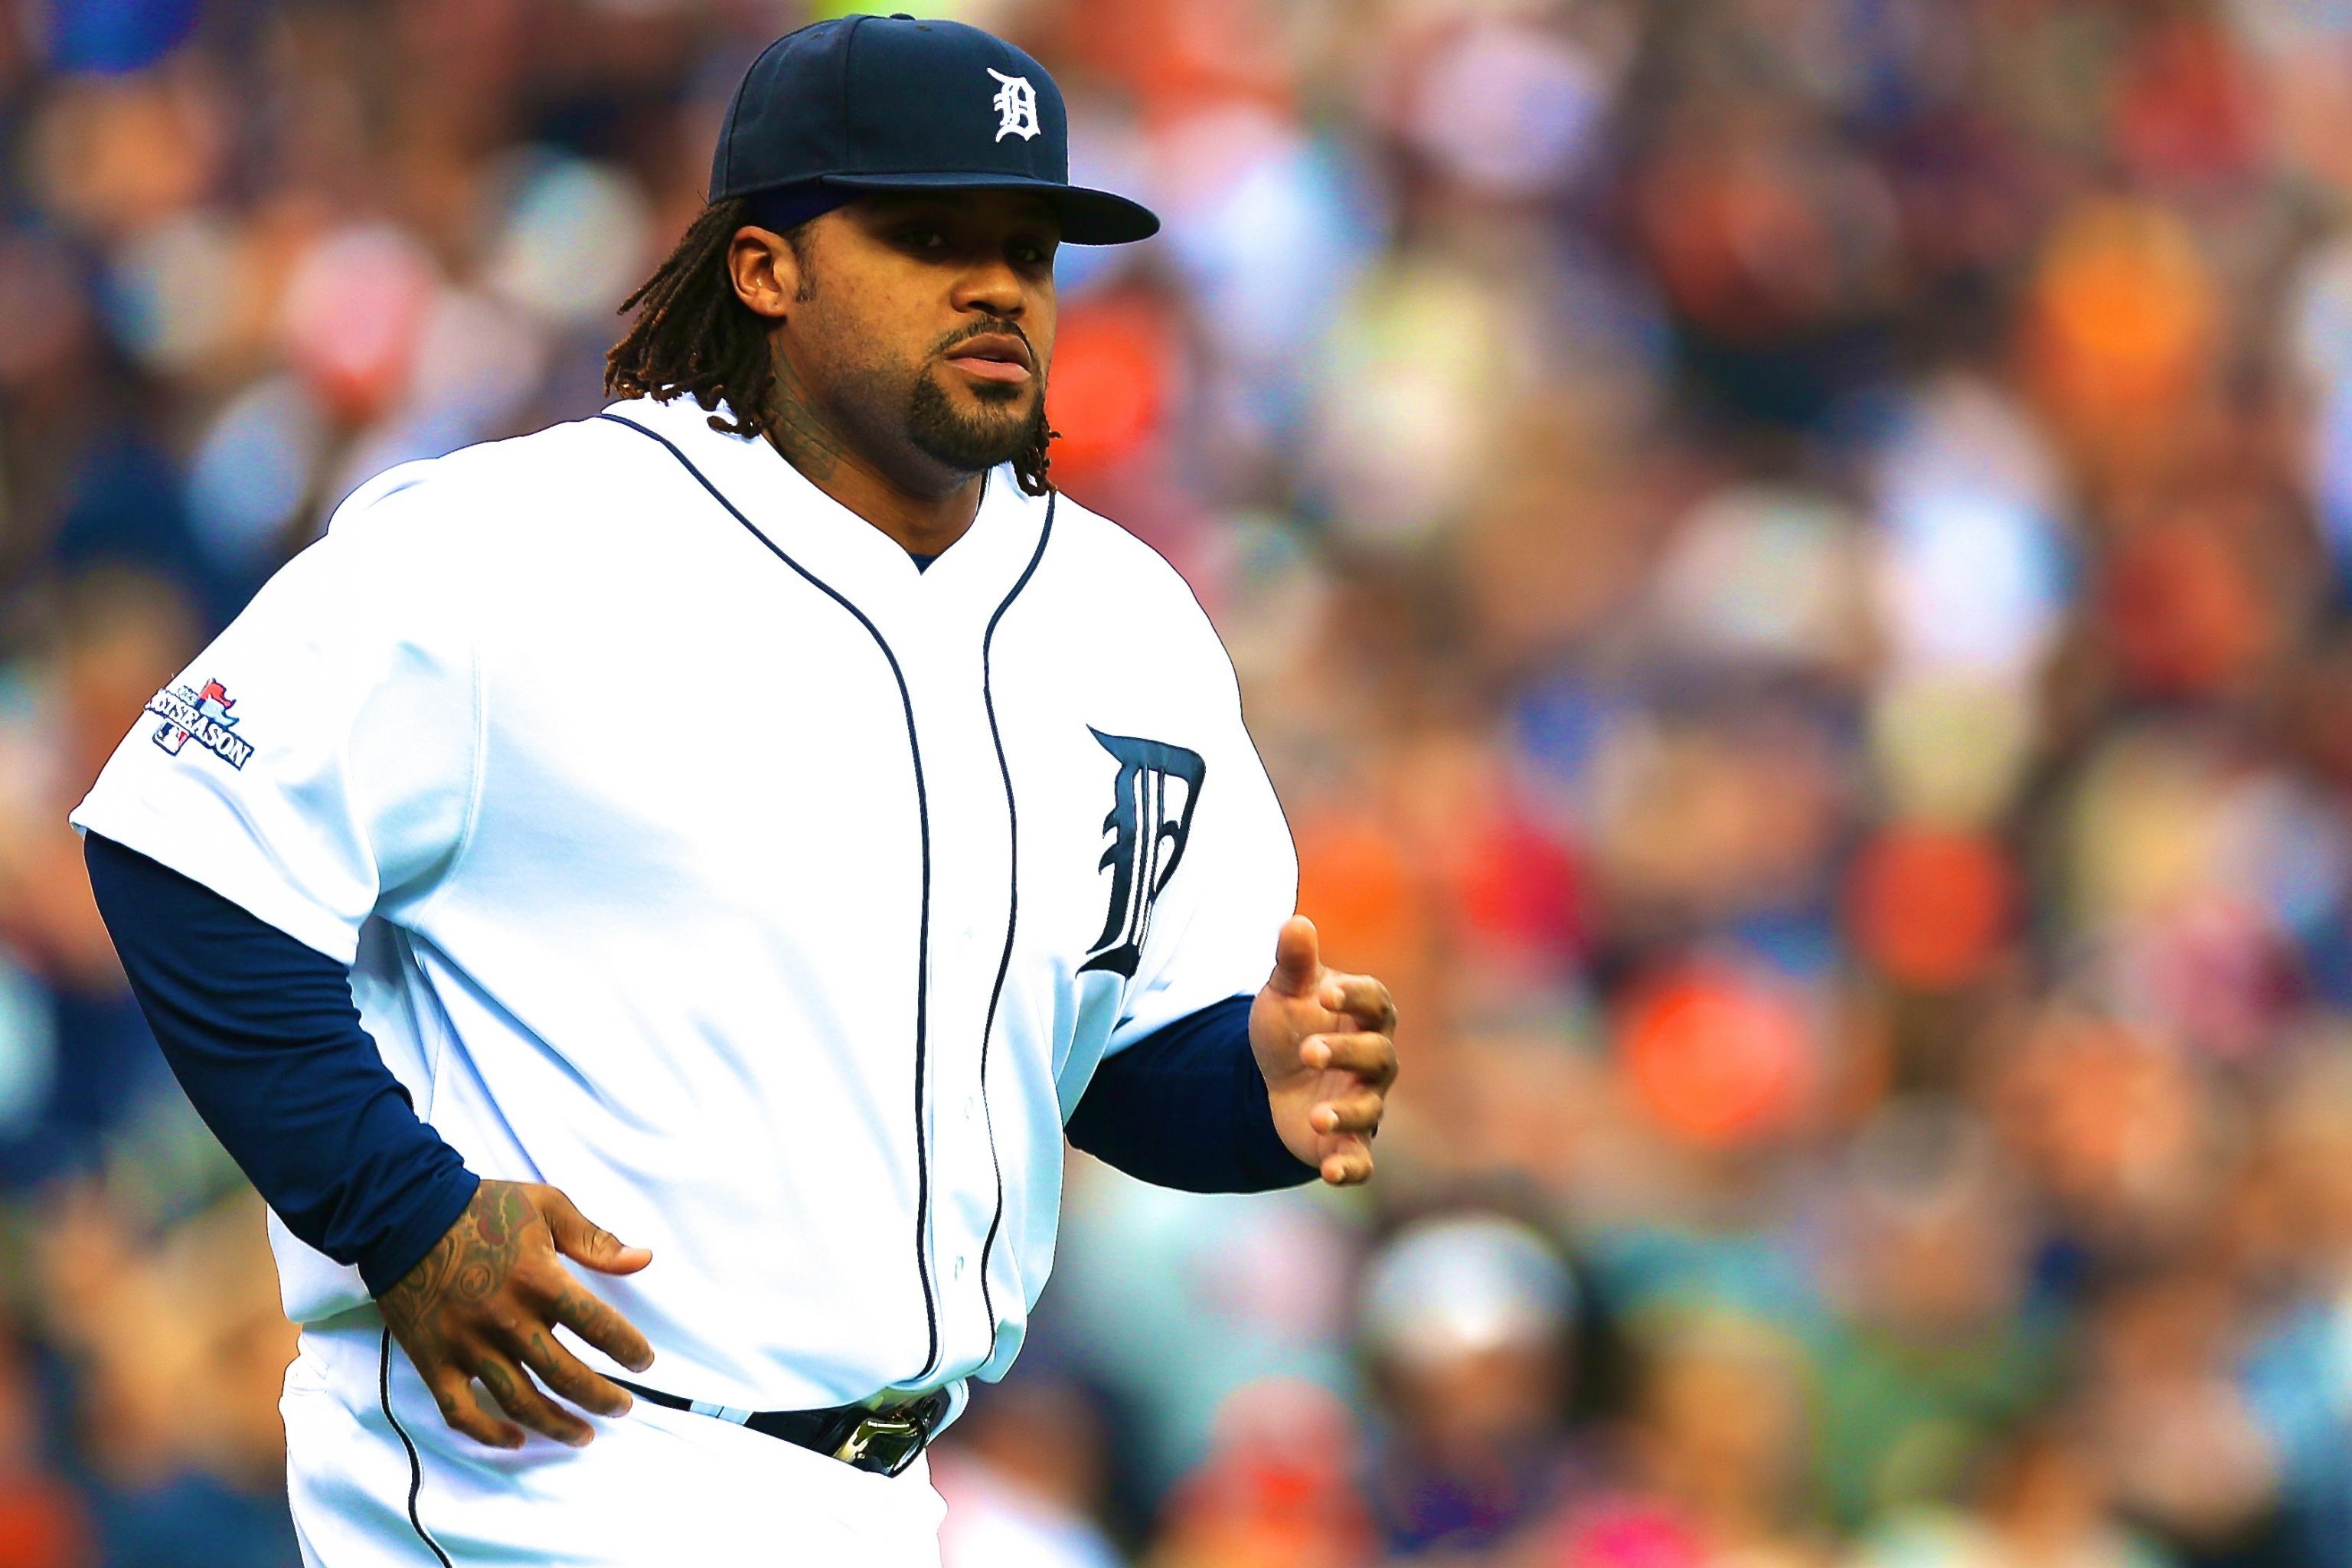 Happy is what you make it': An inside look at Prince Fielder's